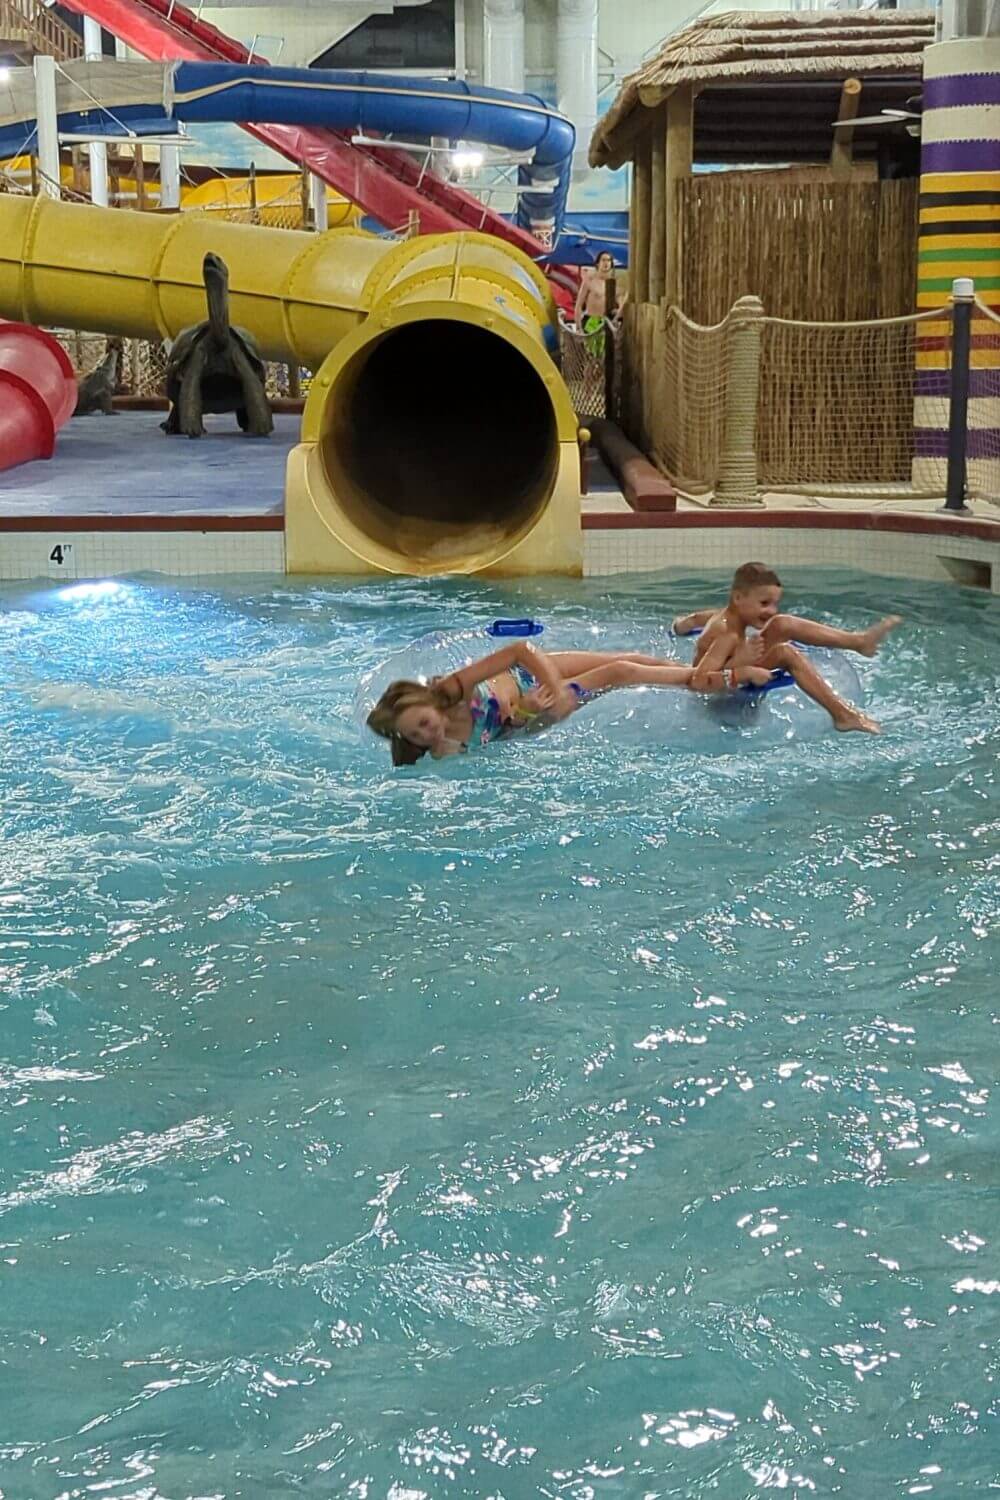 Our kids coming out of the tube slide at Kalahari